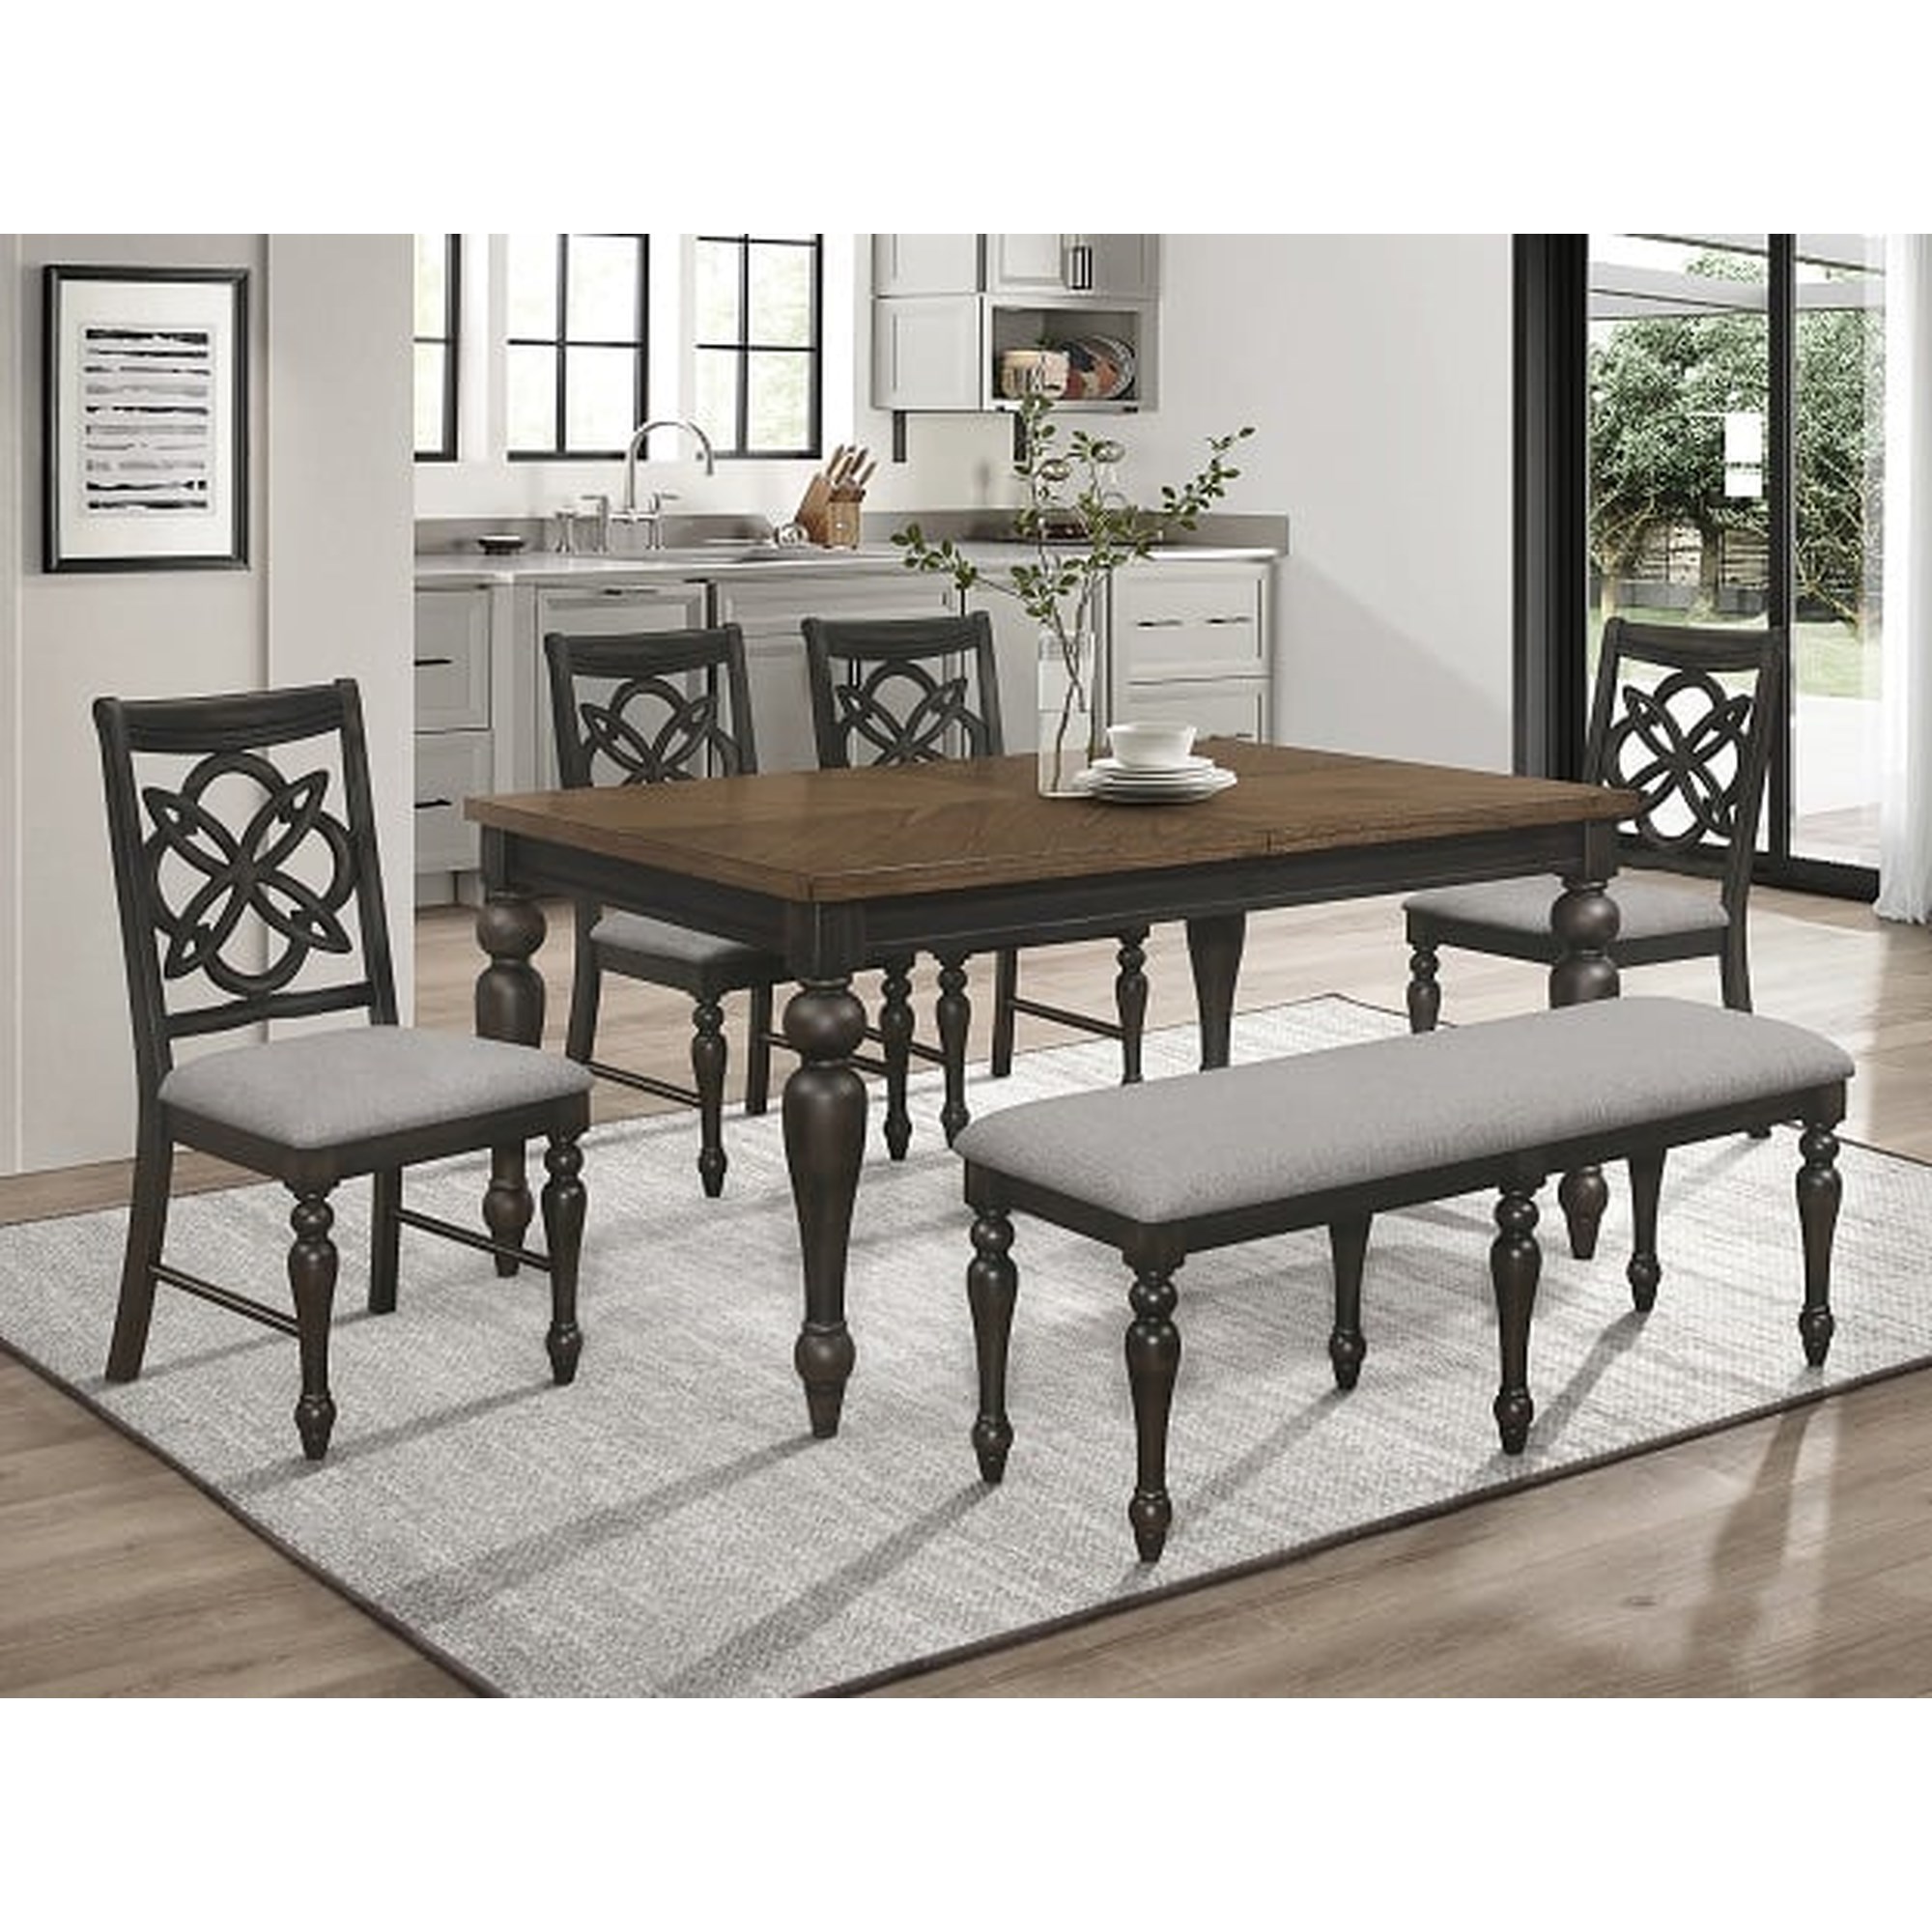 Crown Mark Hilara 2134T-4280 Transitional Dining Table with 18